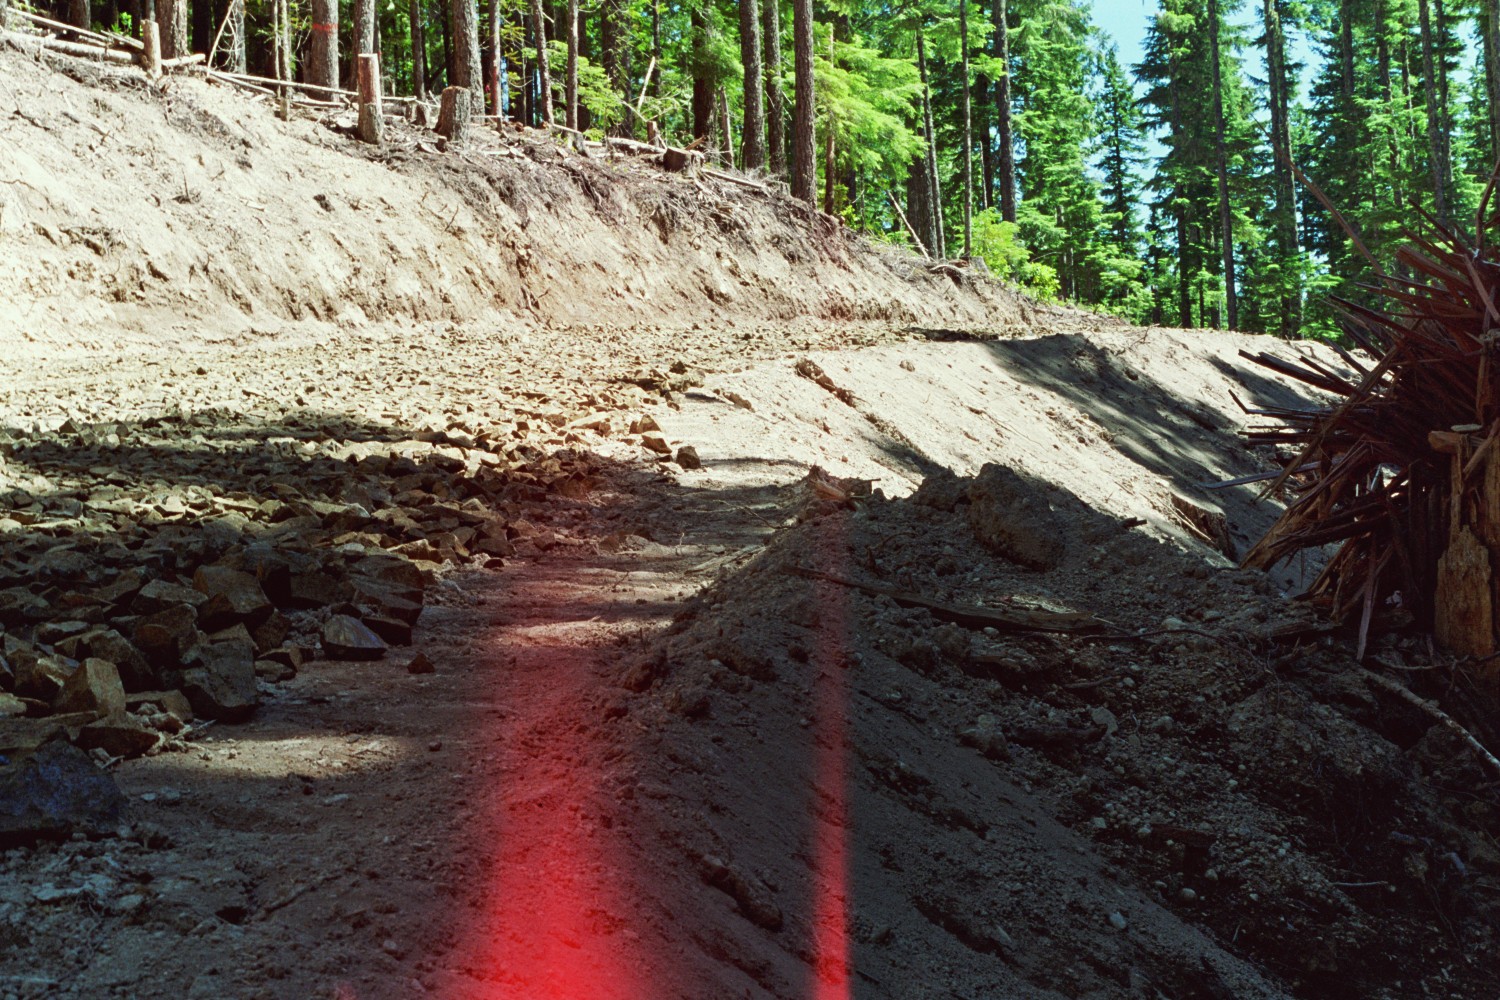 This photo is taken within the Upper Timber Sale soon after the commission of a logging road. The road is mostly sand and gravel and exposed sediment. Many trees are cut closest to the road.